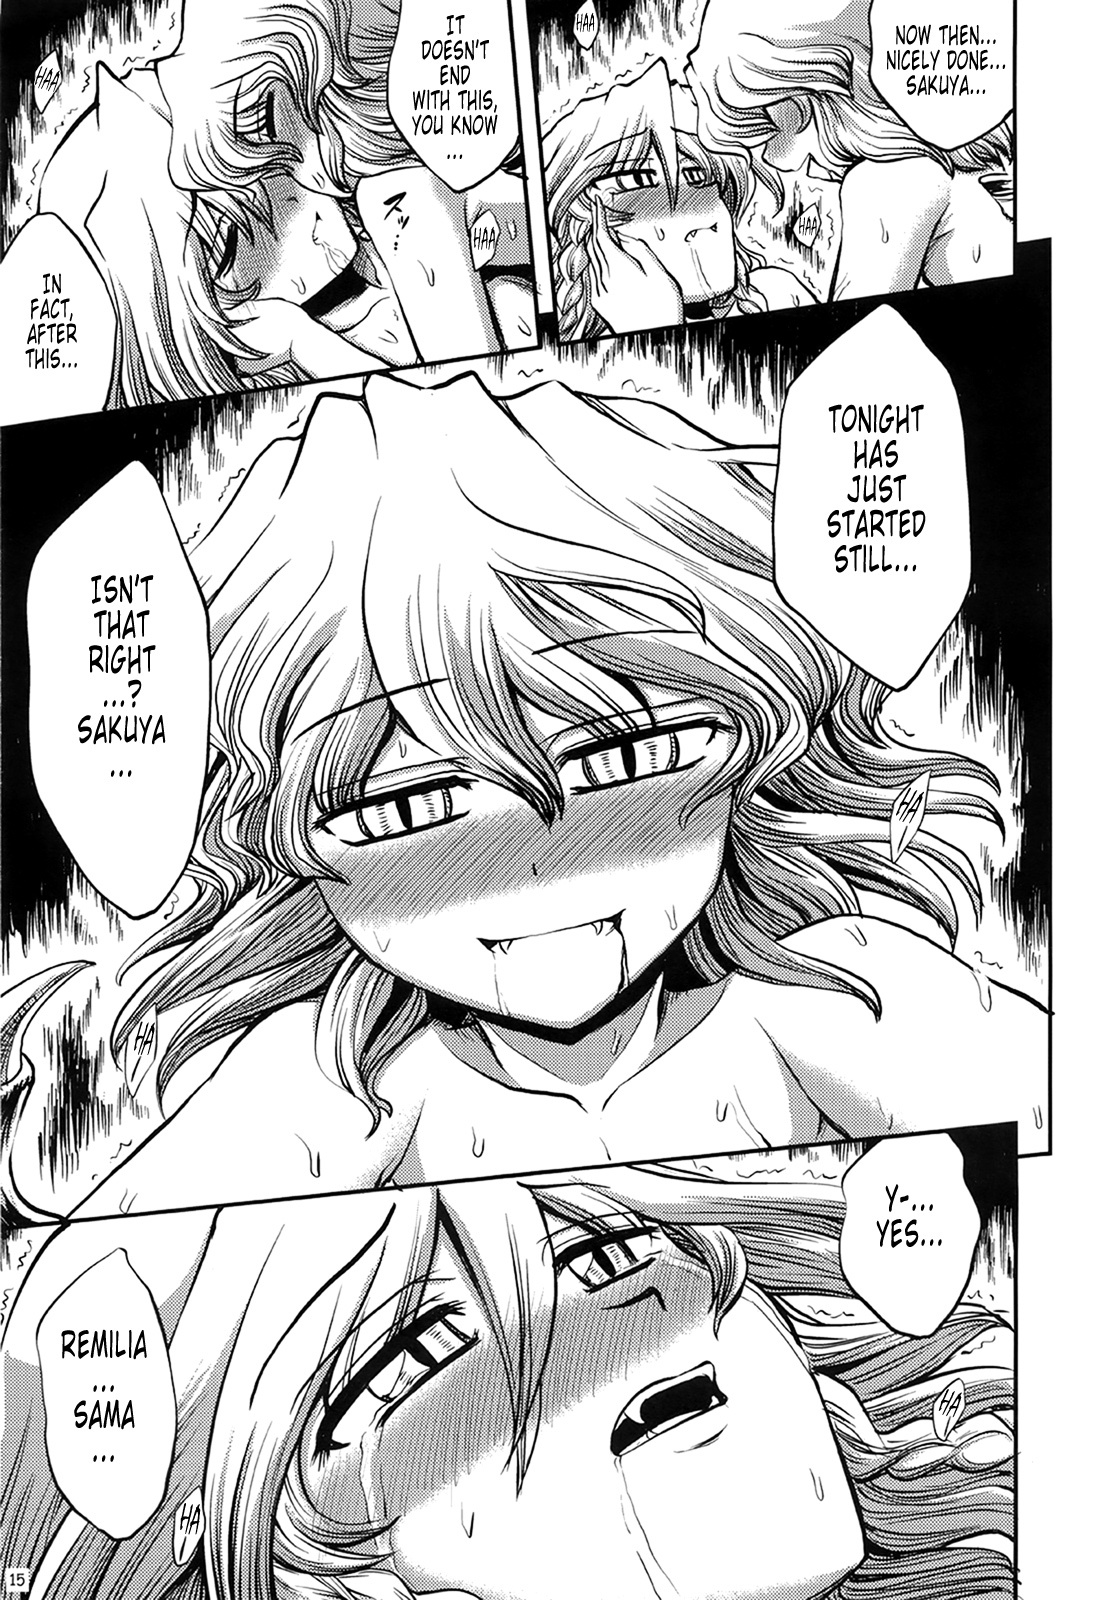 The Maid and The Bloody Clock of Fate touhou project 13 hentai manga